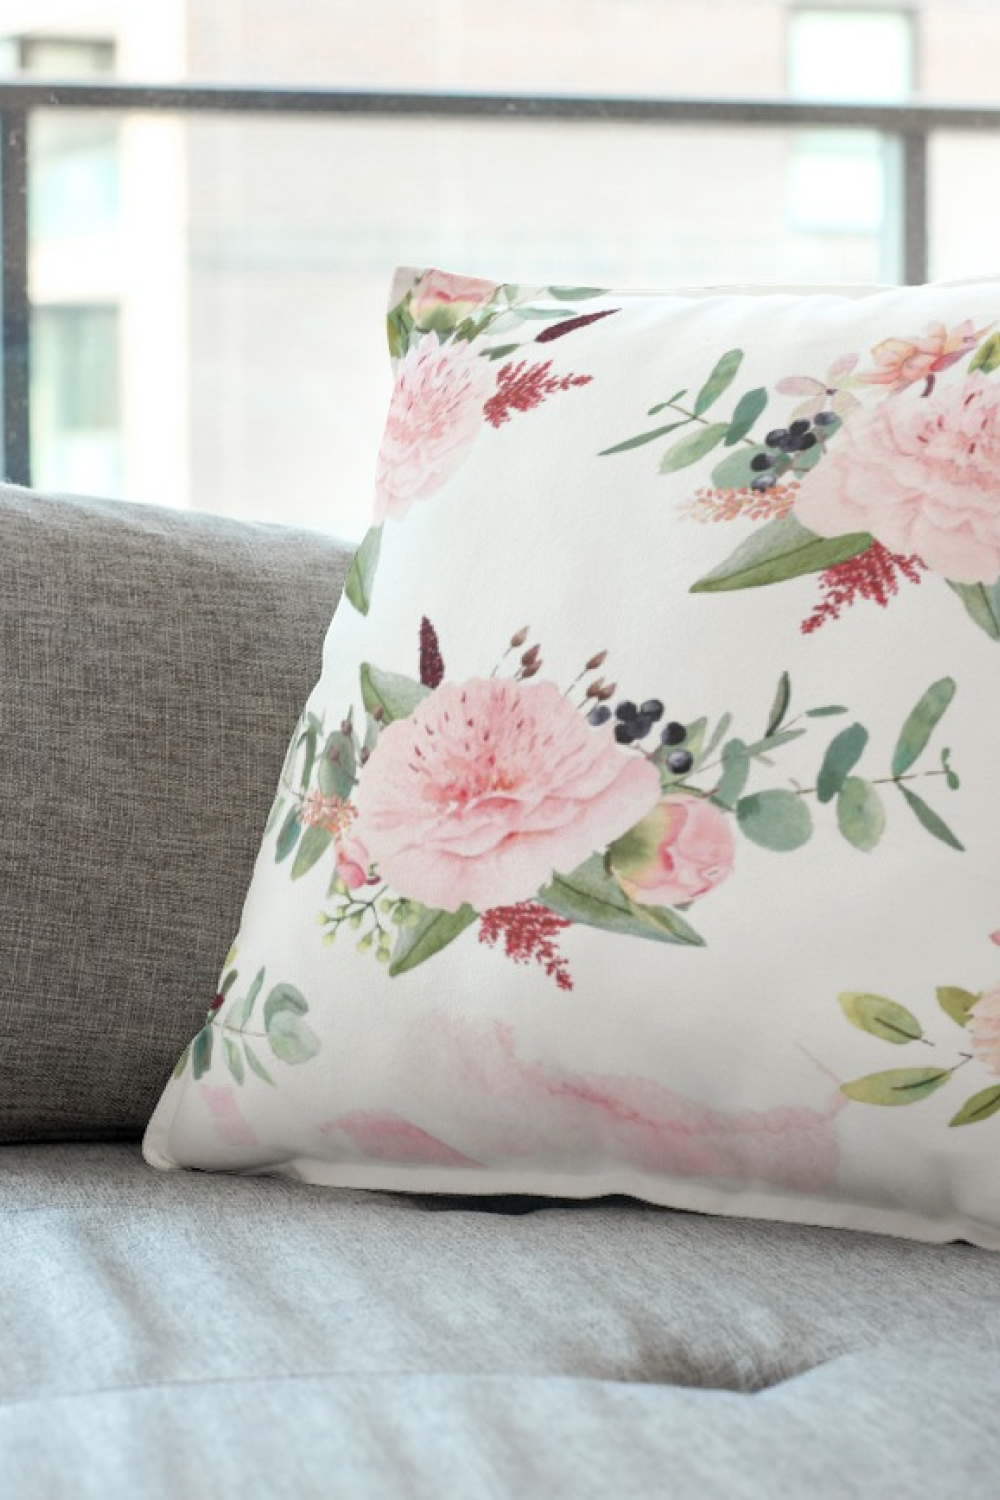 Prin peonies on a pillow.